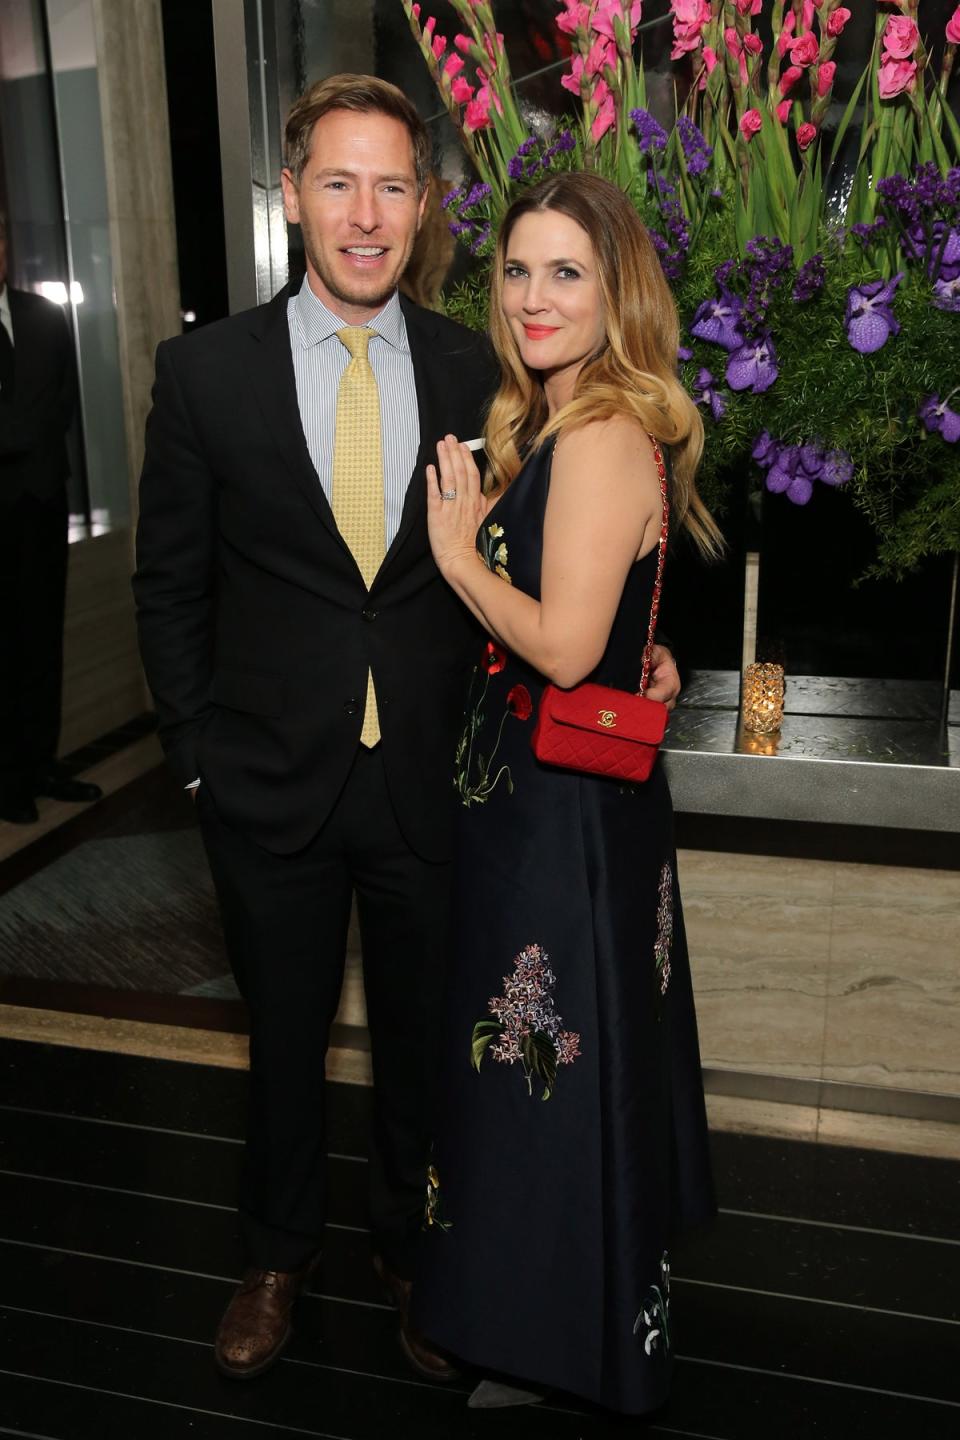 Drew Barrymore and Will Kopelman in 2015, before their divorce (Getty Images)